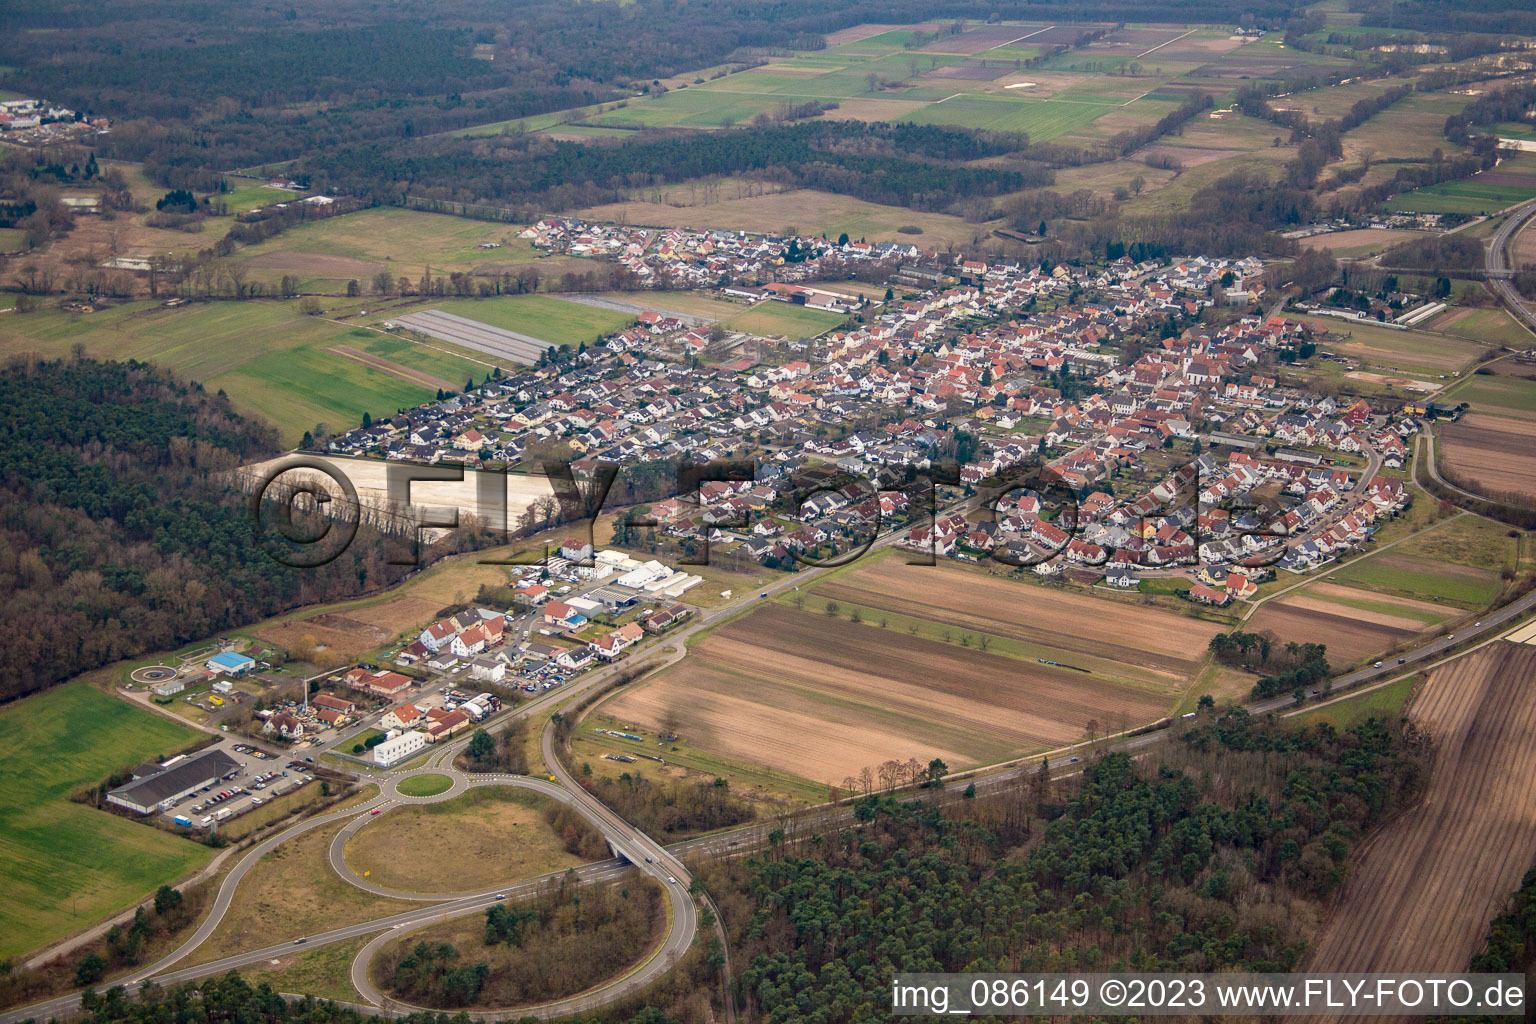 Aerial photograpy of Hanhofen in the state Rhineland-Palatinate, Germany